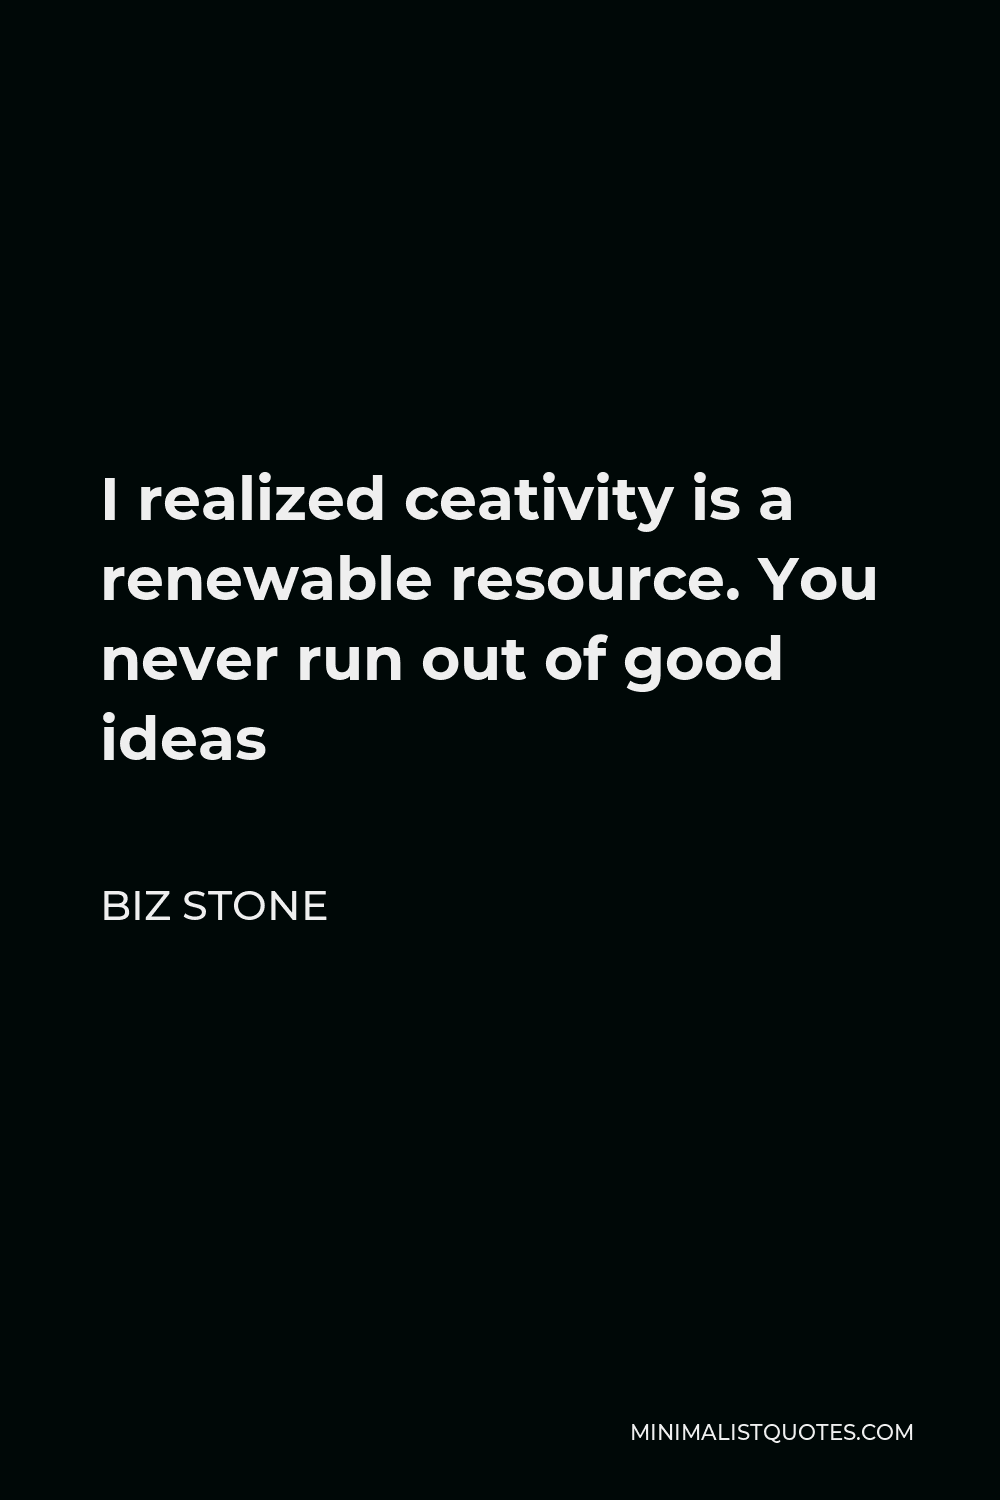 Biz Stone Quote - I realized ceativity is a renewable resource. You never run out of good ideas